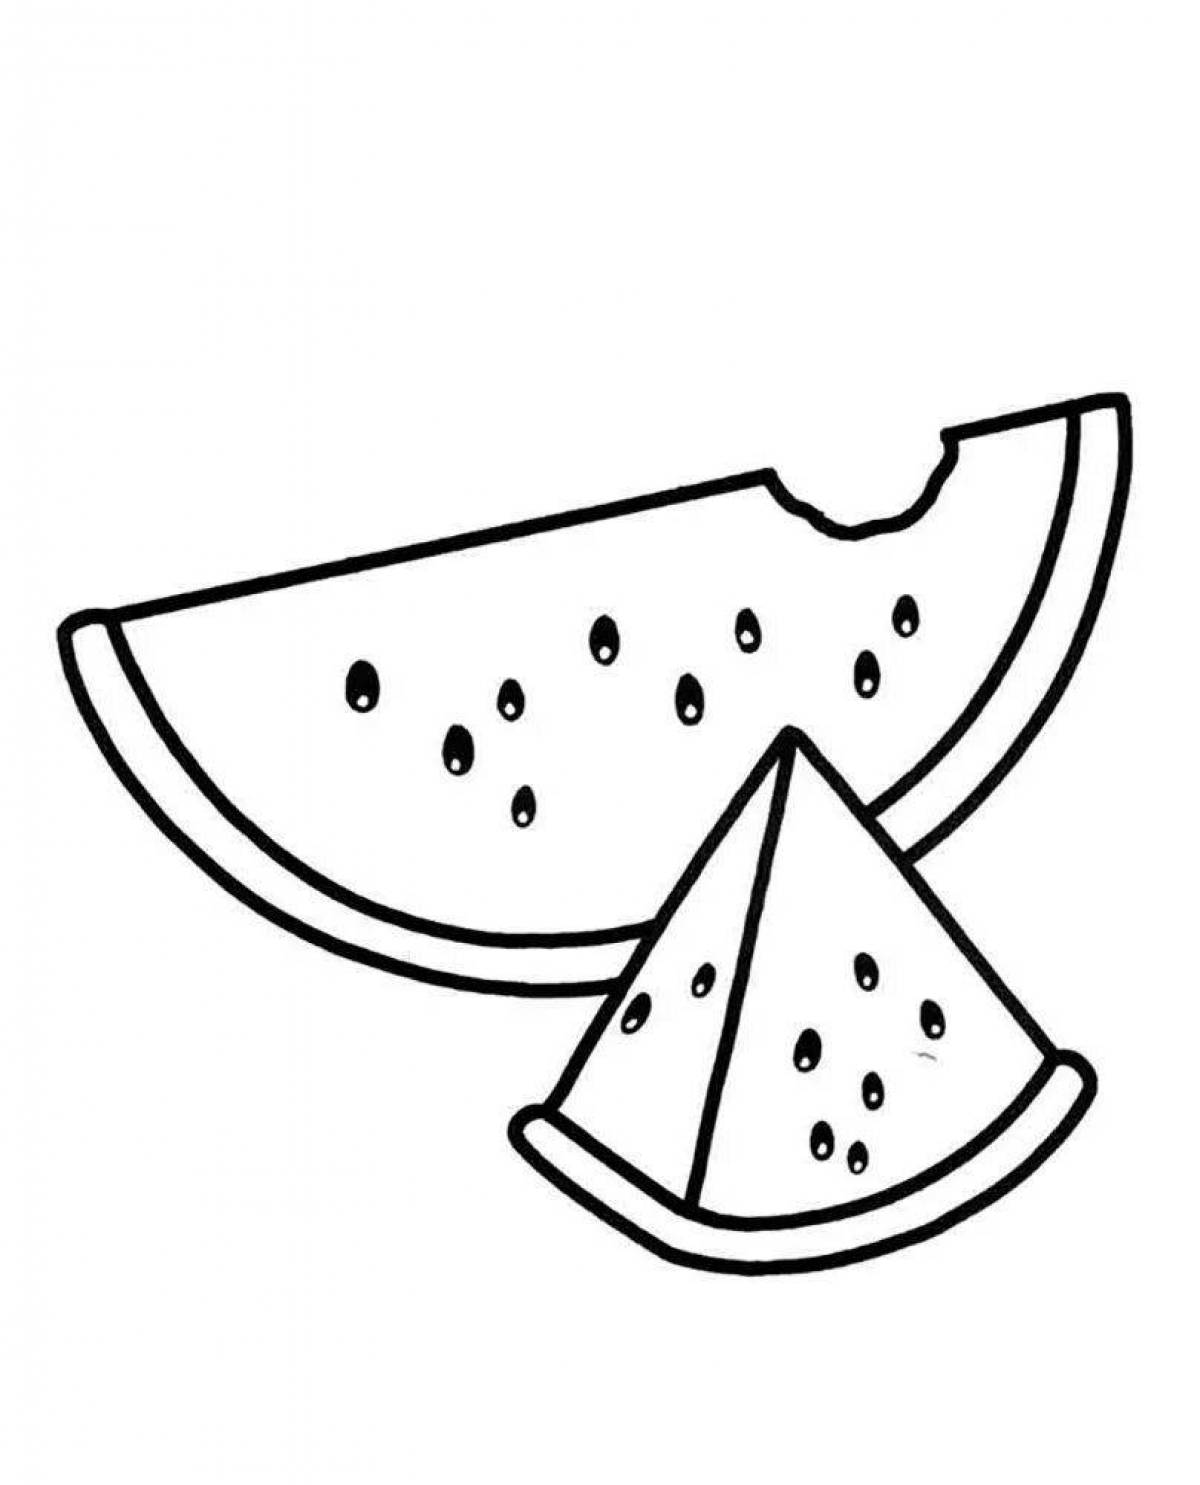 Live watermelon coloring page